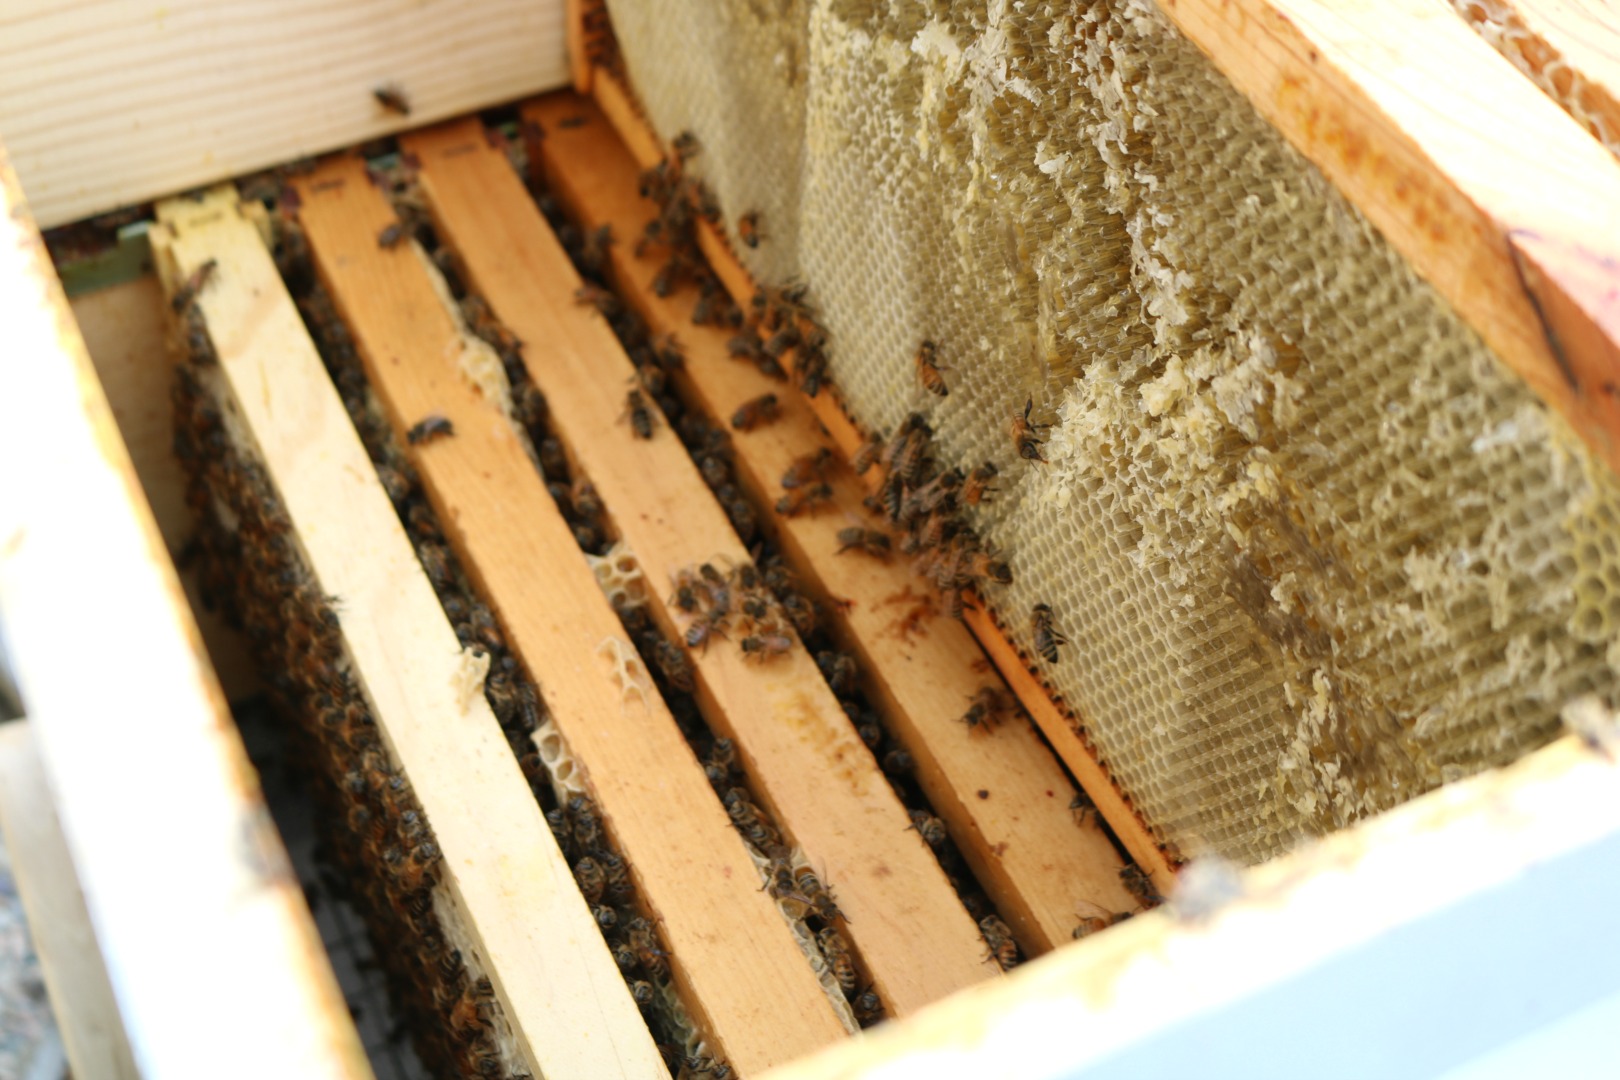 Bee Keeping- Q&A Top Bee Keeping Questions Answered